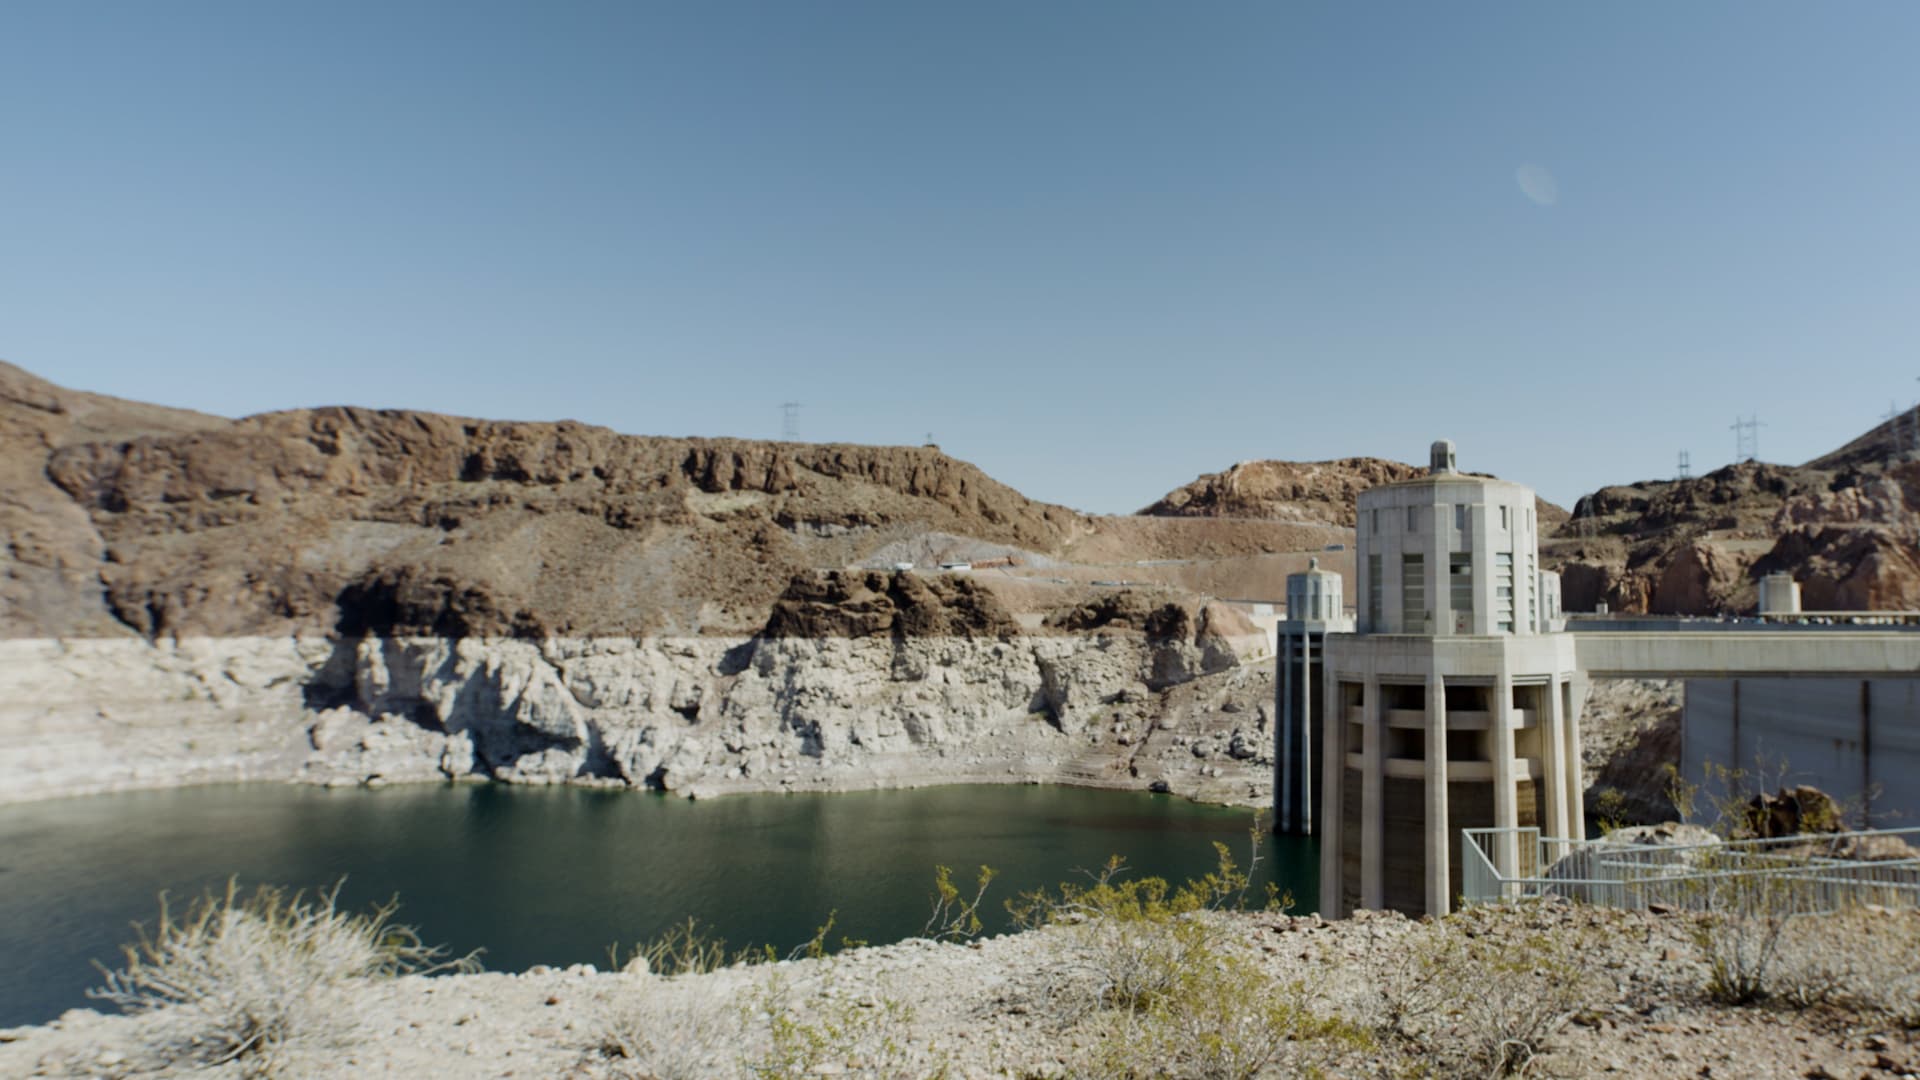 Lake Mead, the large reservoir located in Nevada and Arizona that feeds the Hoover Dam, is at an all-time low. The white rocks indicate the water level of the lake when it is full.